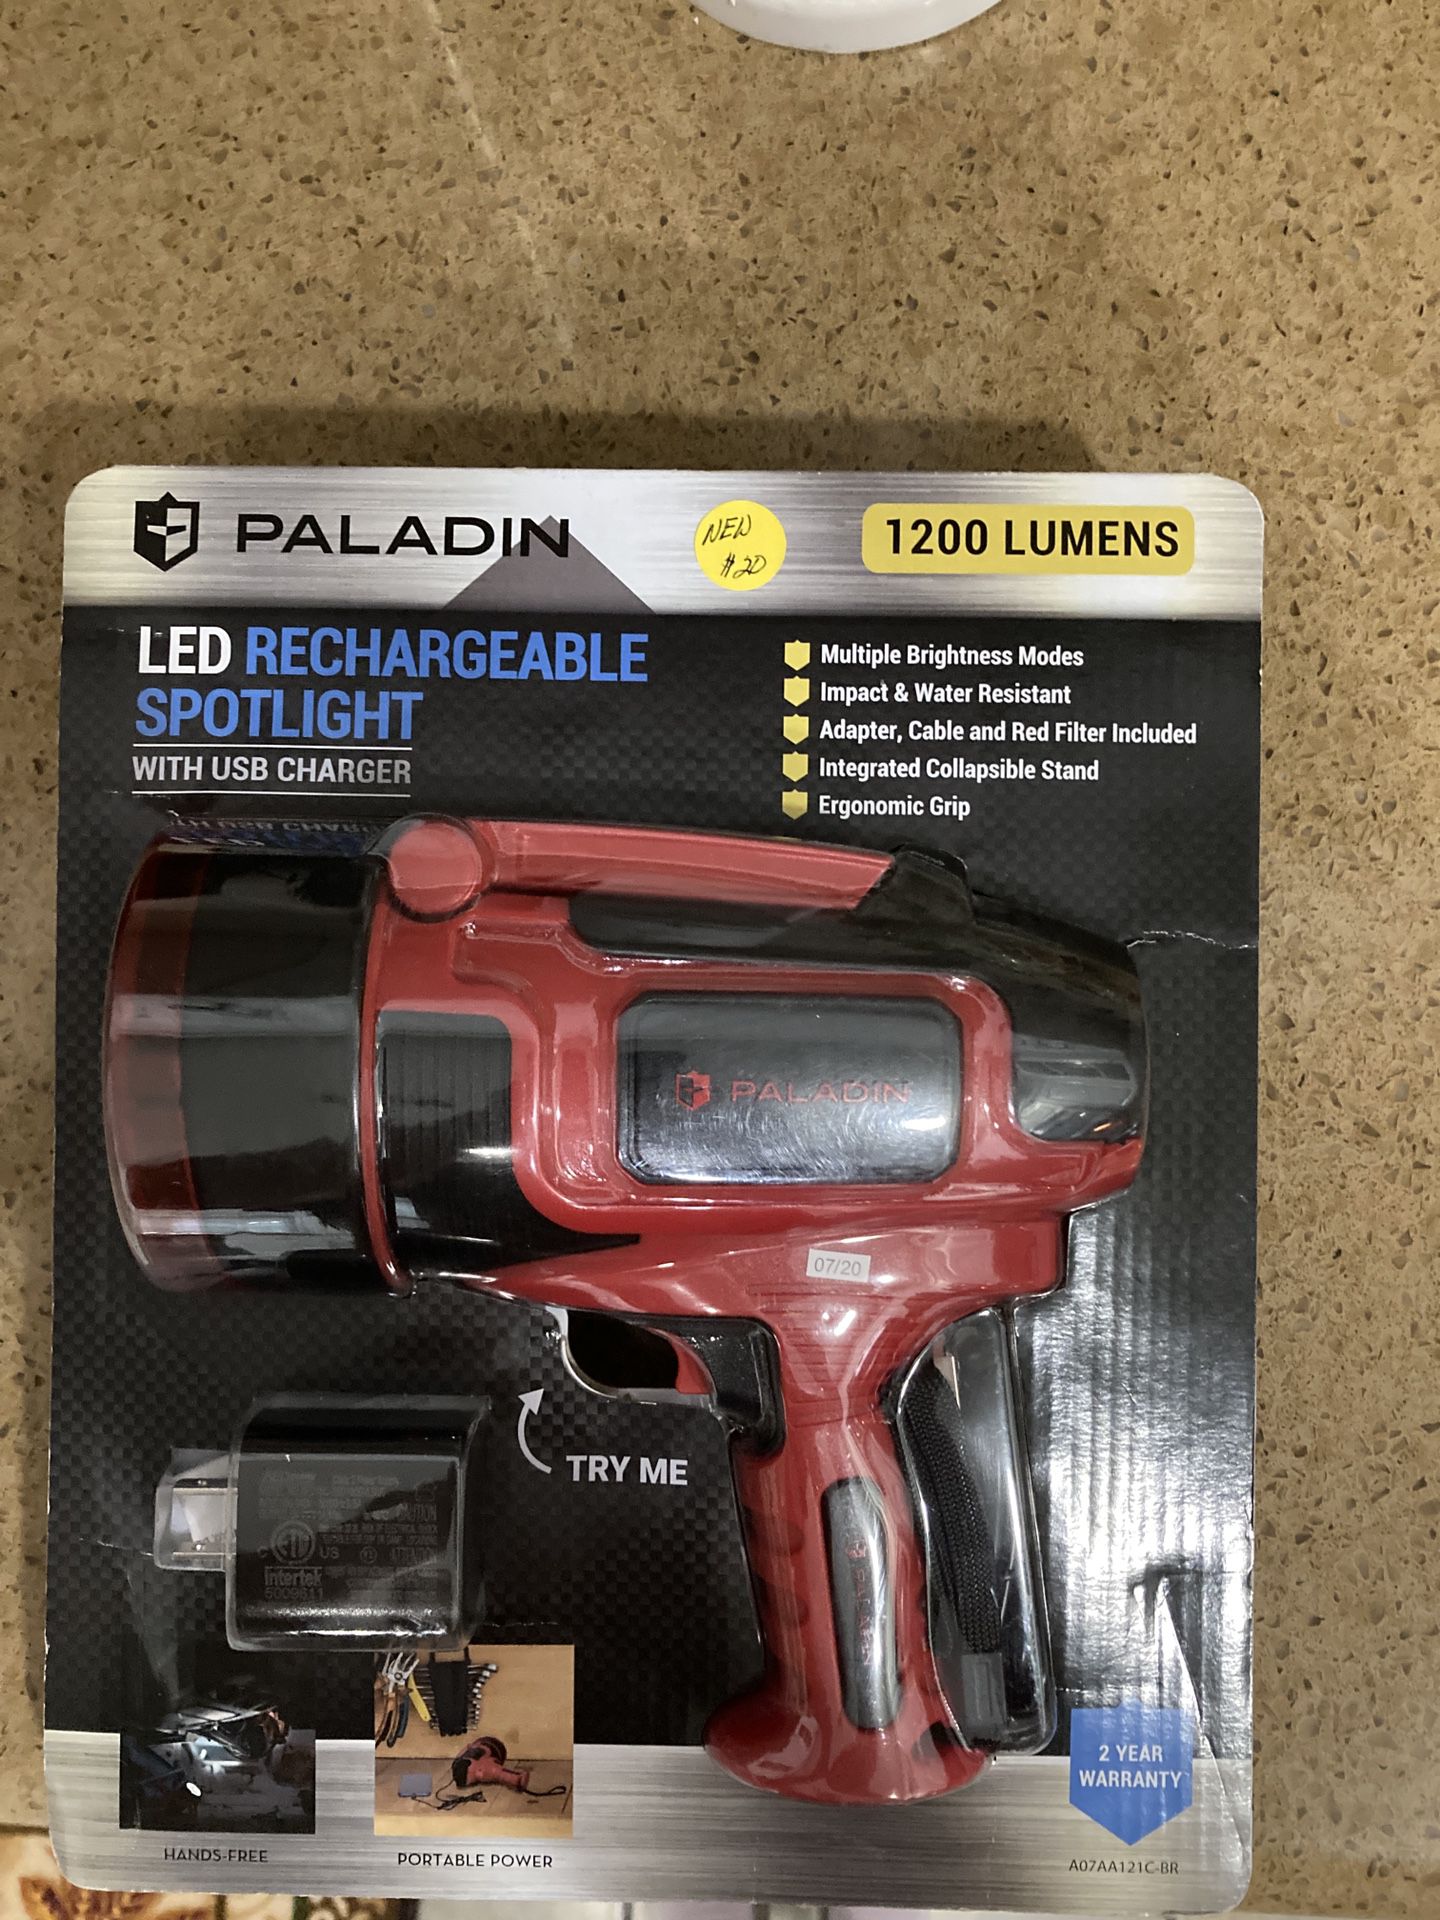 NEW Paladin LED Rechargeable Spotlight With USB Charger